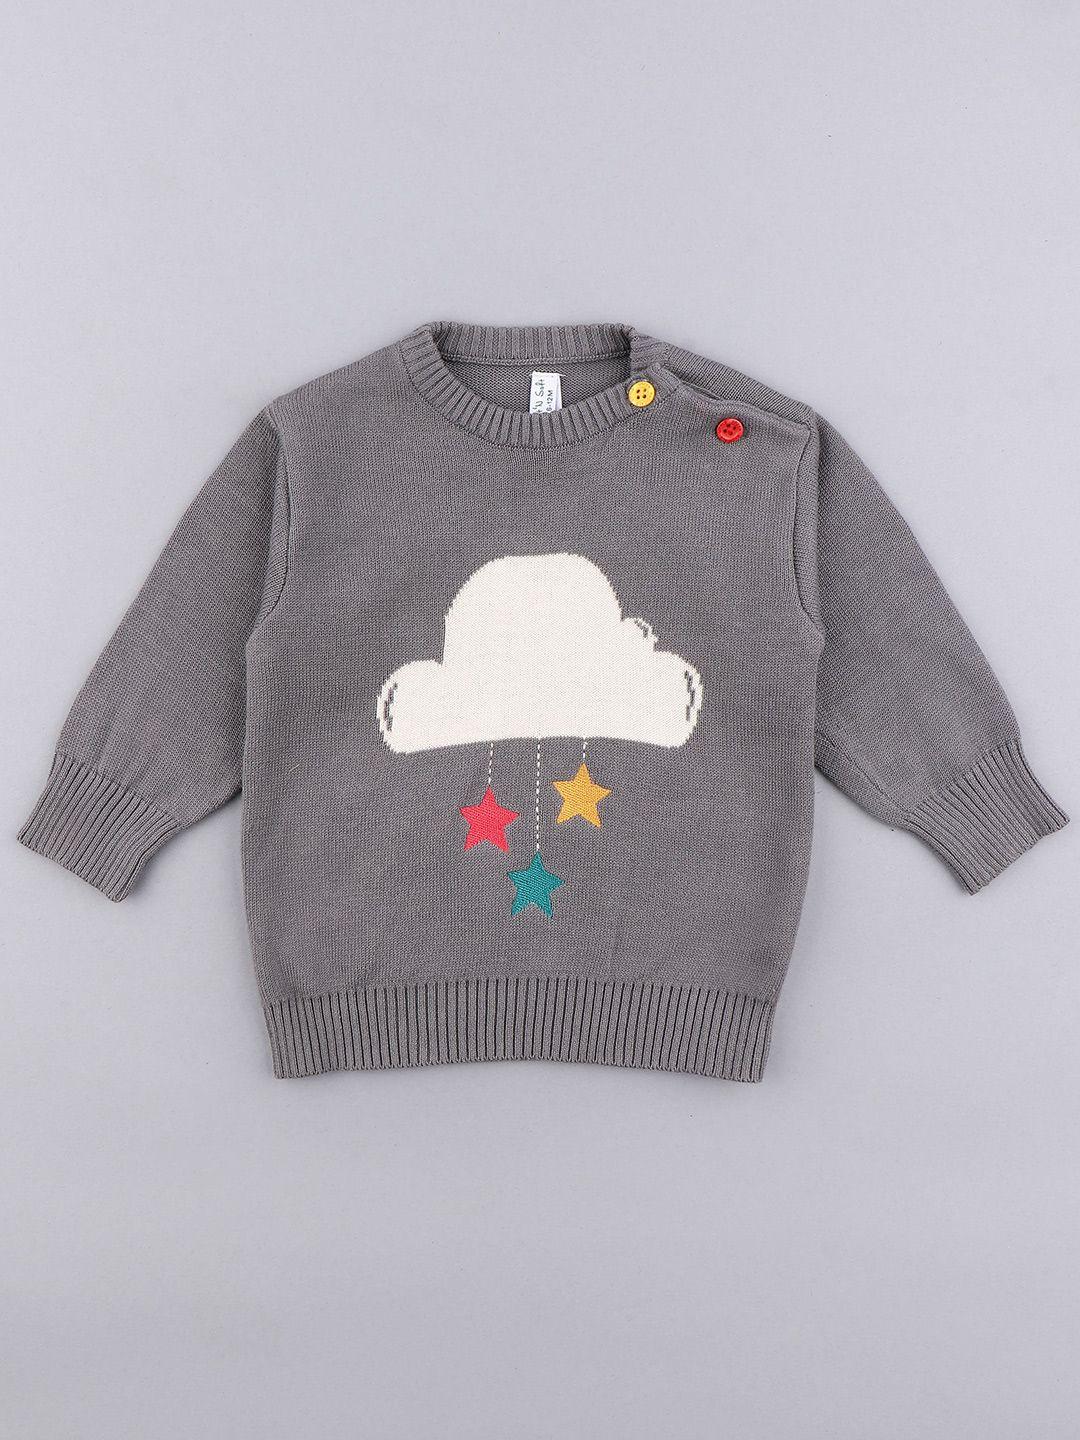 cot'n soft boys graphic printed woollen pullover sweater